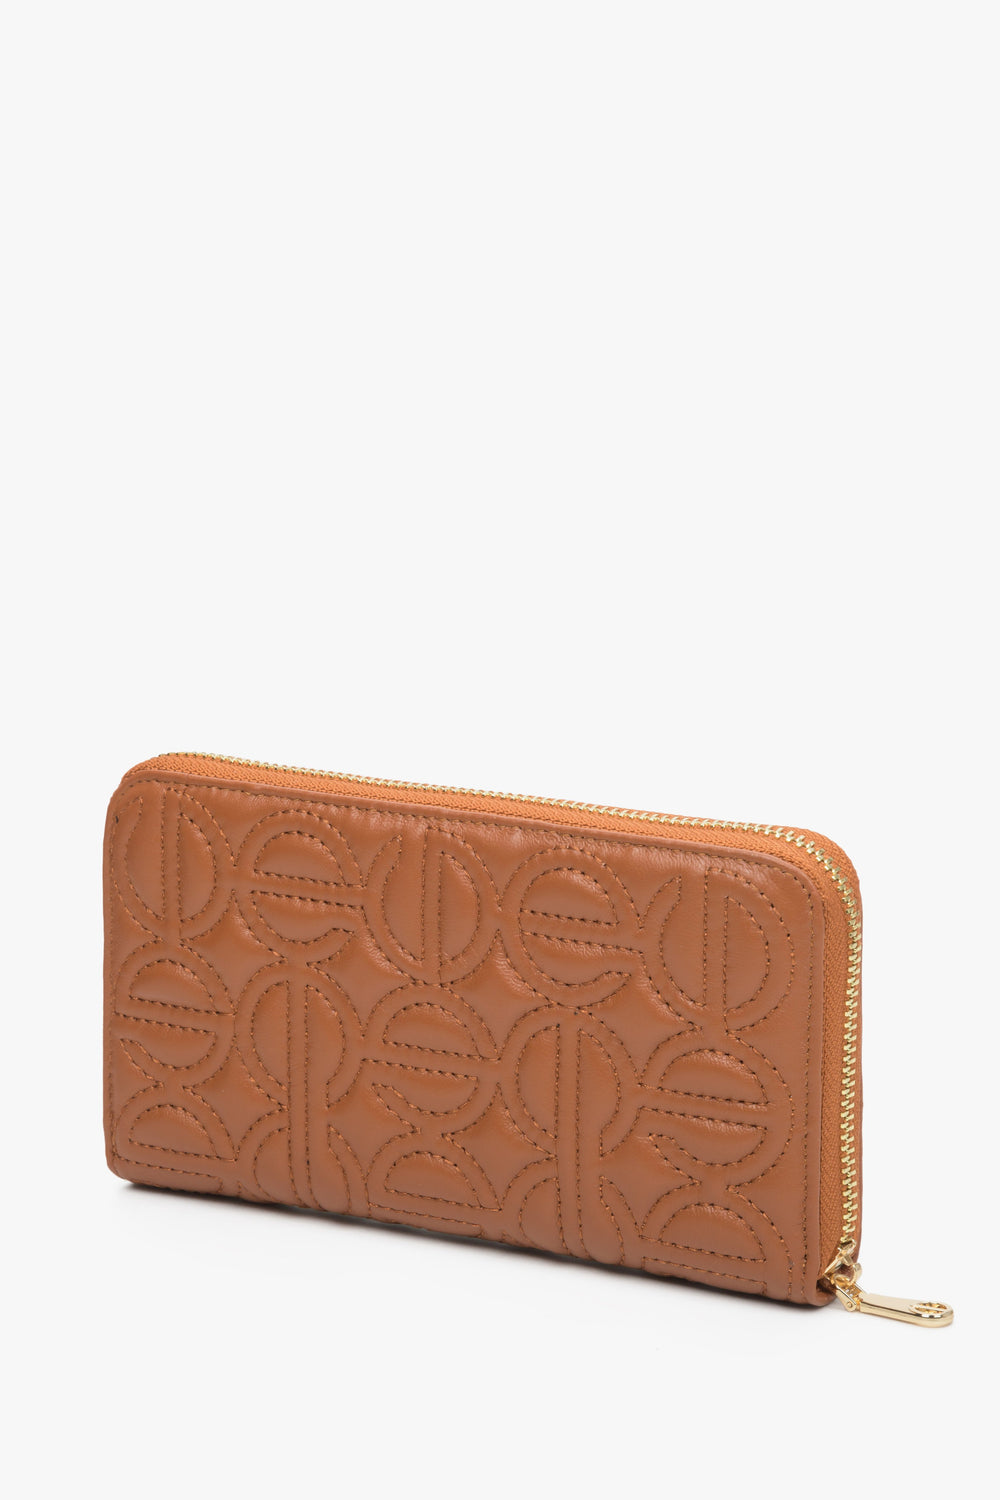 Large brown women's continental wallet with a zipper by Estro.